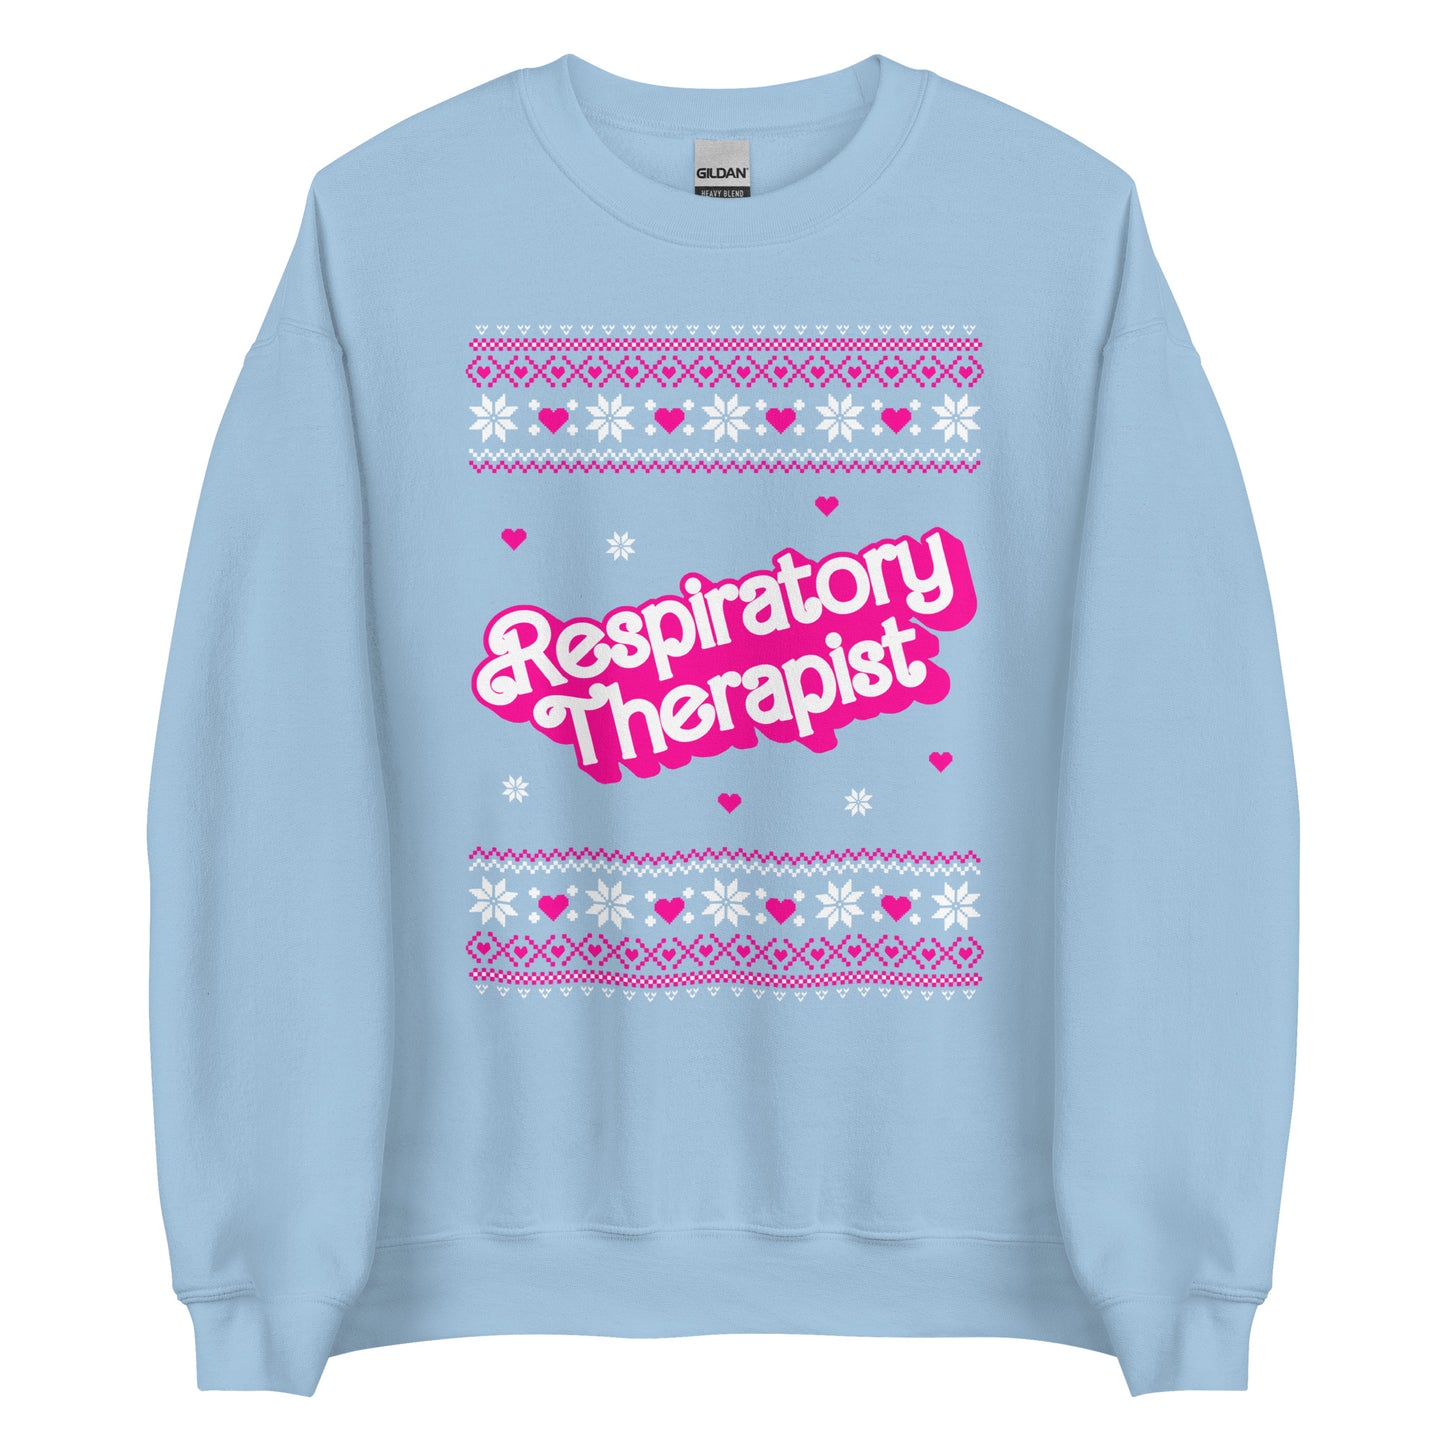 Barbie Respiratory Therapist Ugly Christmas Sweater